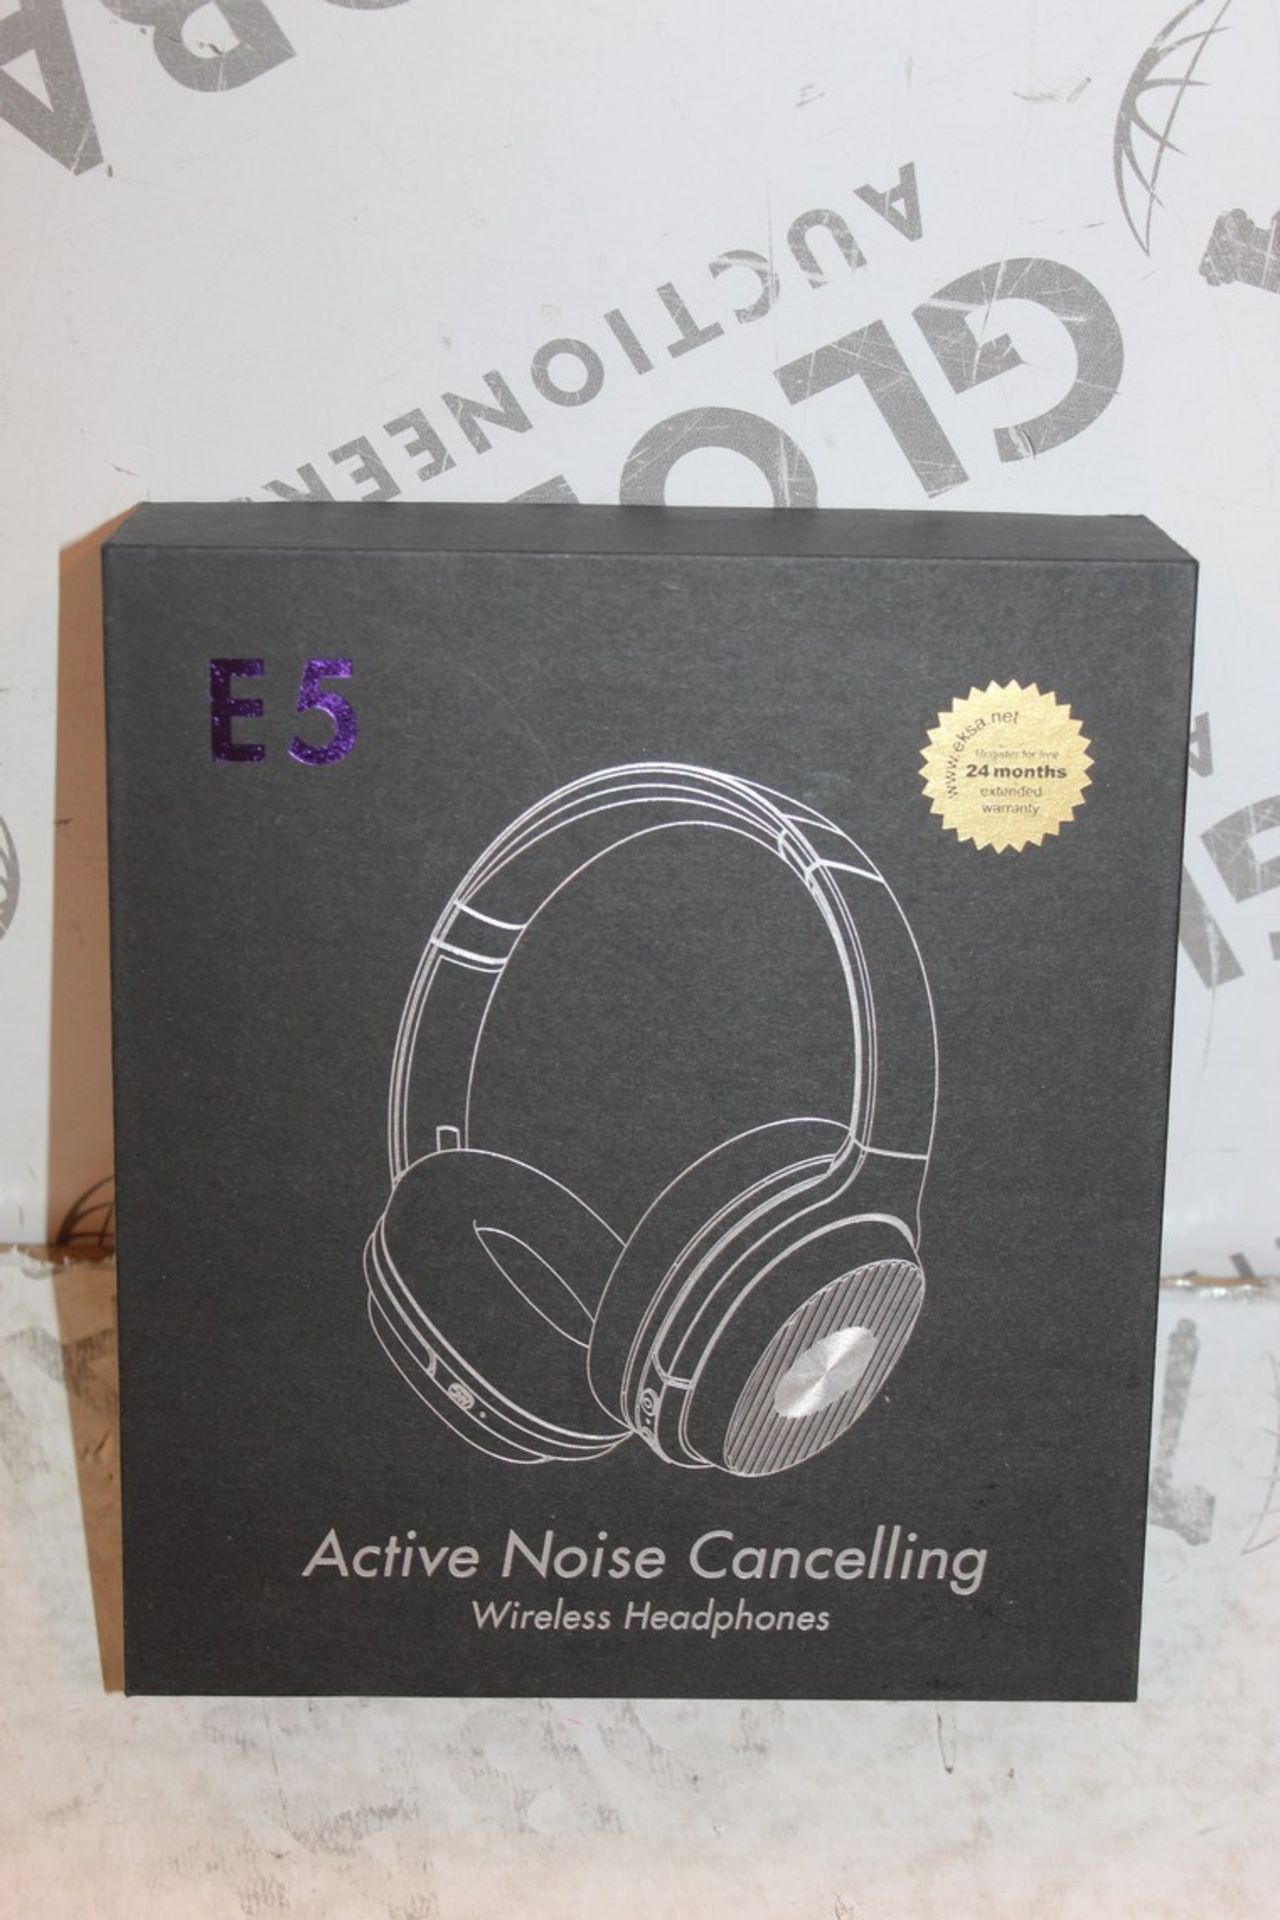 Boxed Pair Of E5 Active Noise Cancelling Wireless Headphones RRP £50 (Appraisals Available Upon